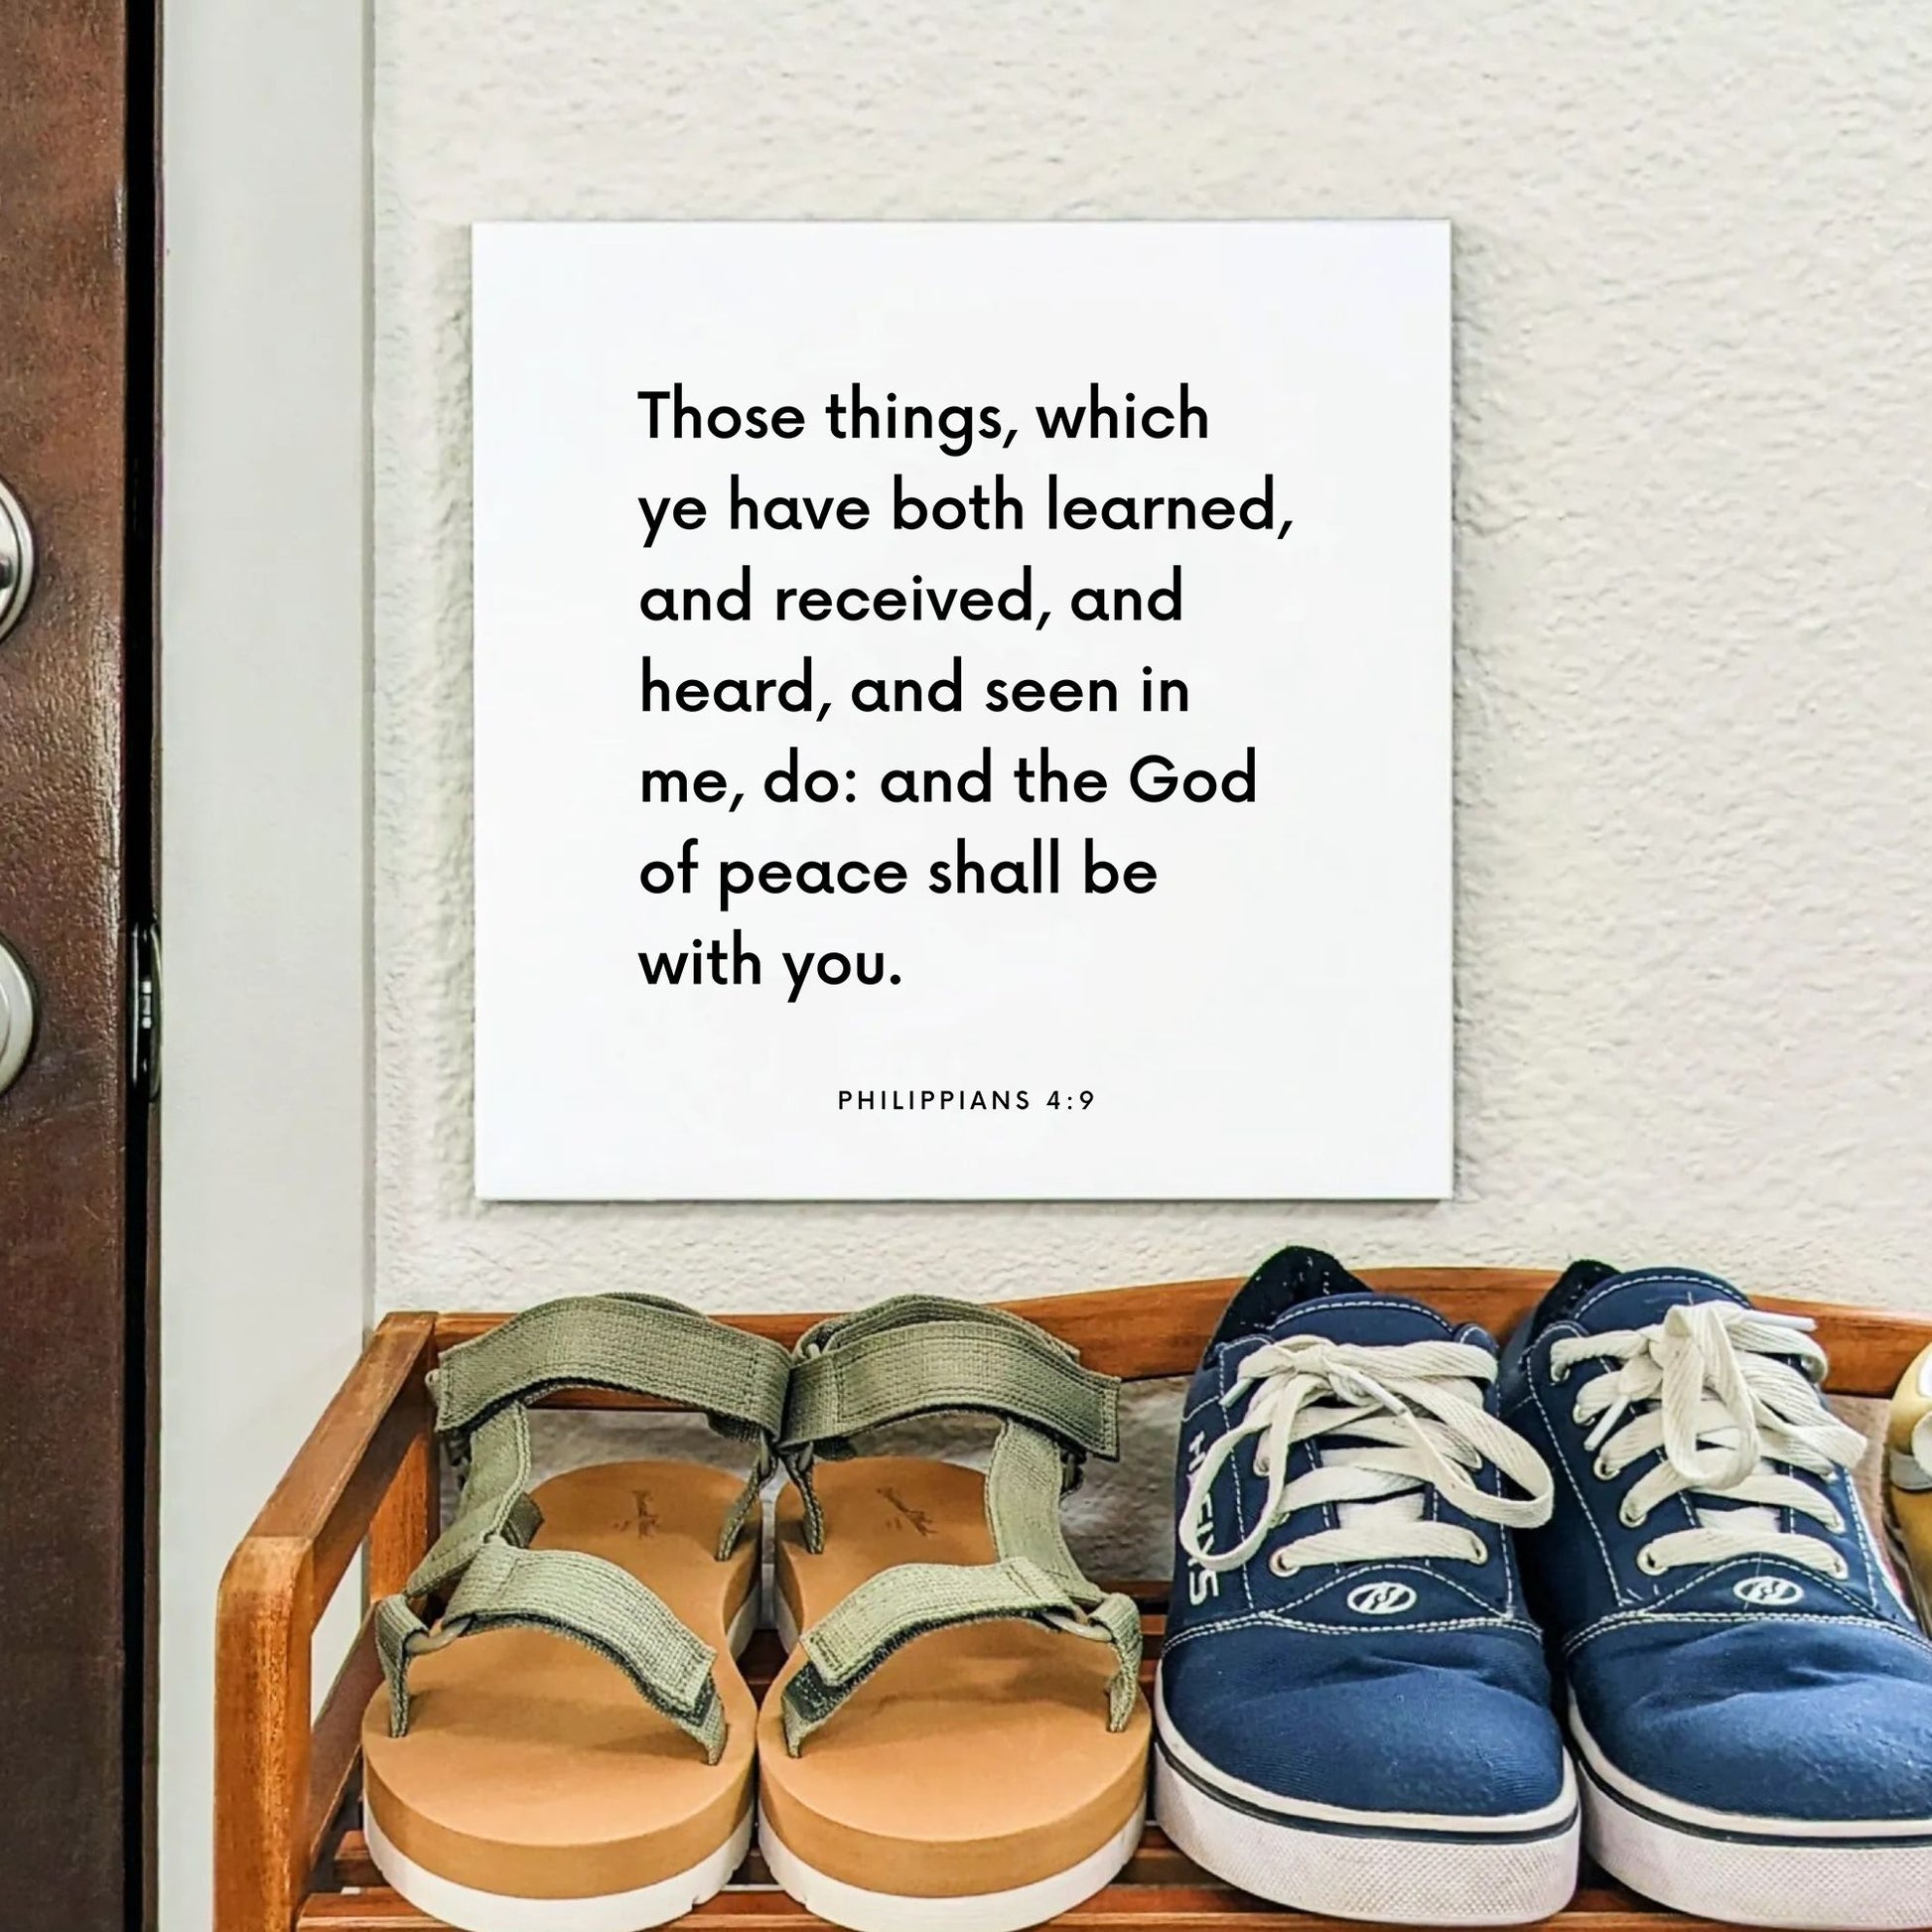 Shoes mouting of the scripture tile for Philippians 4:9 - "Those things which ye have seen in me, do"